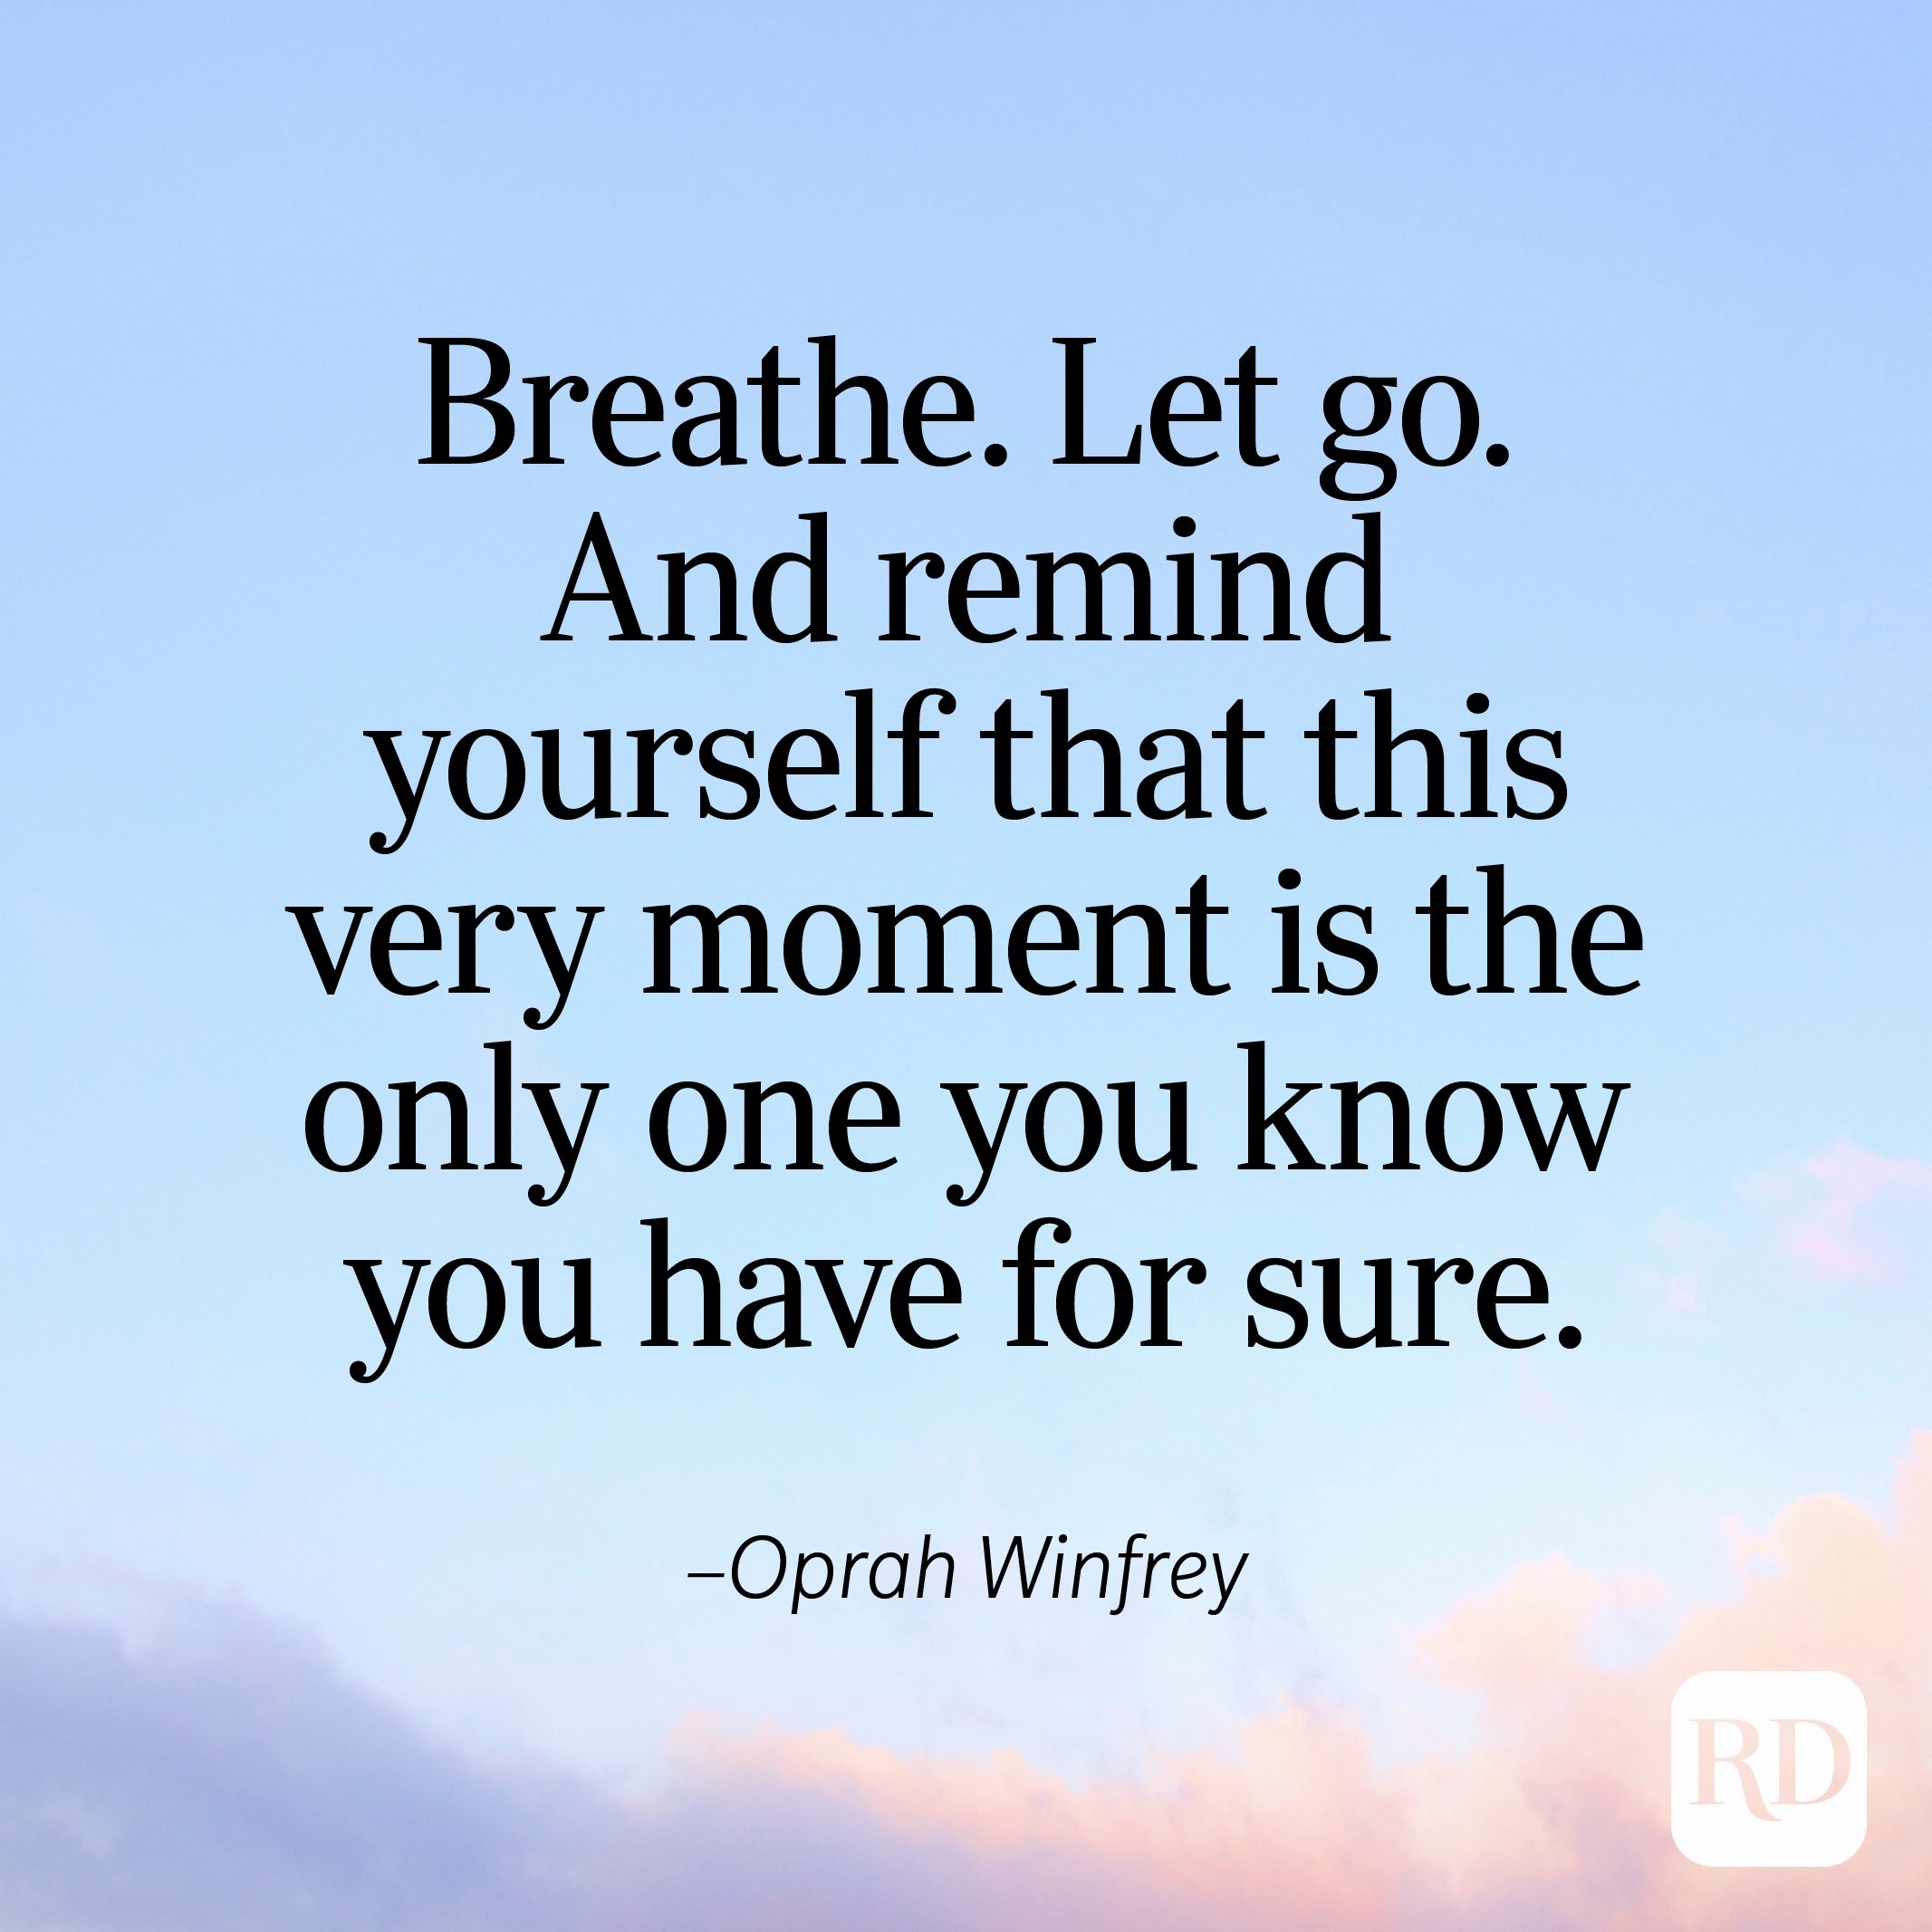 "Breathe. Let go. And remind yourself that this very moment is the only one you know you have for sure." —Oprah Winfrey